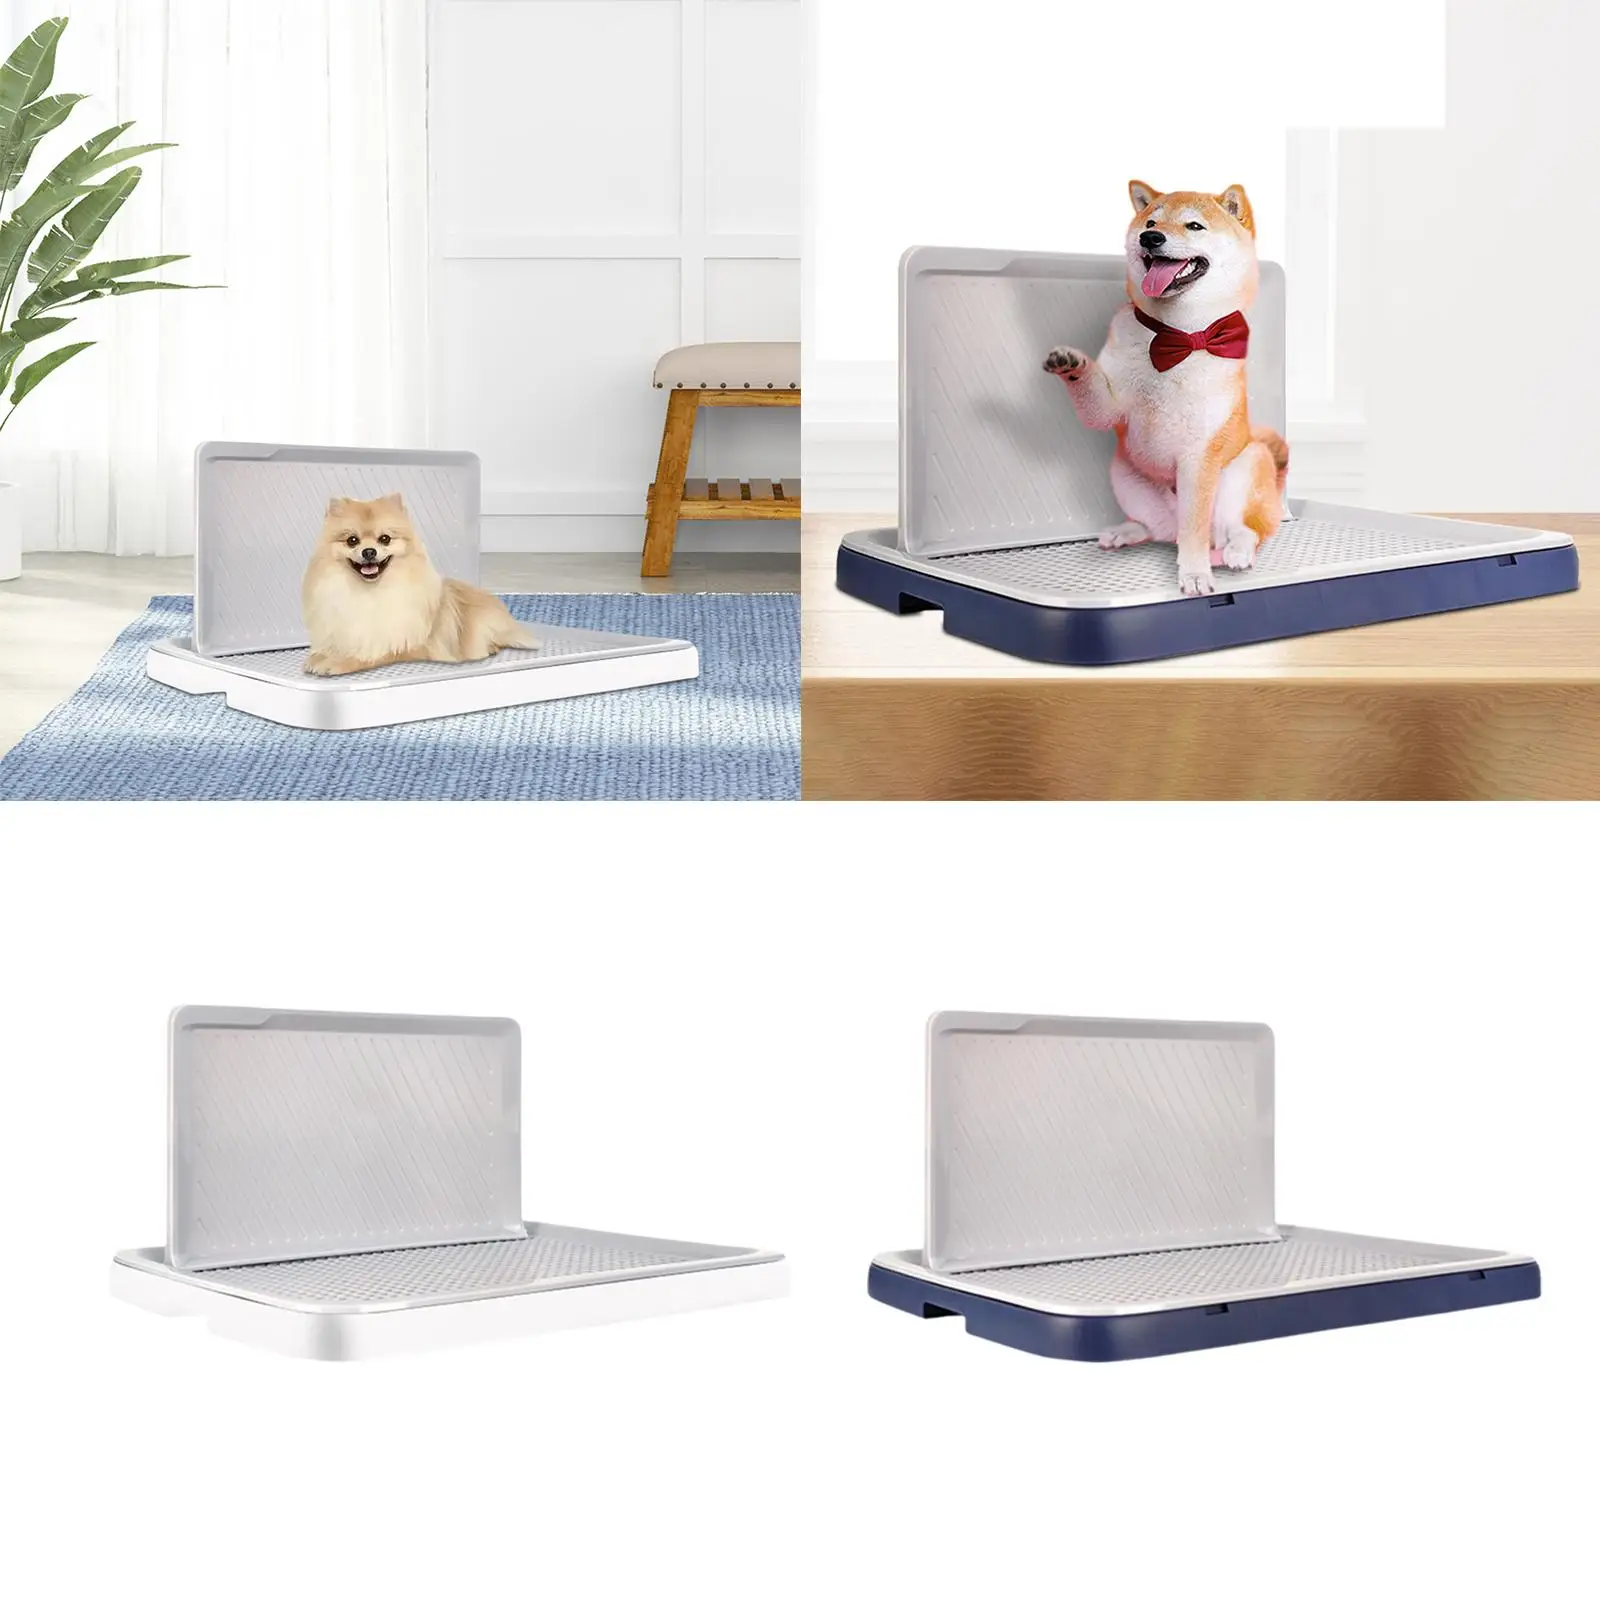 Pet Toilet Puppy Training Potty Tray Indoor Litter Pan Washable Anti Splashing Trainer Corner for Dogs Cats Puppy Home Porch